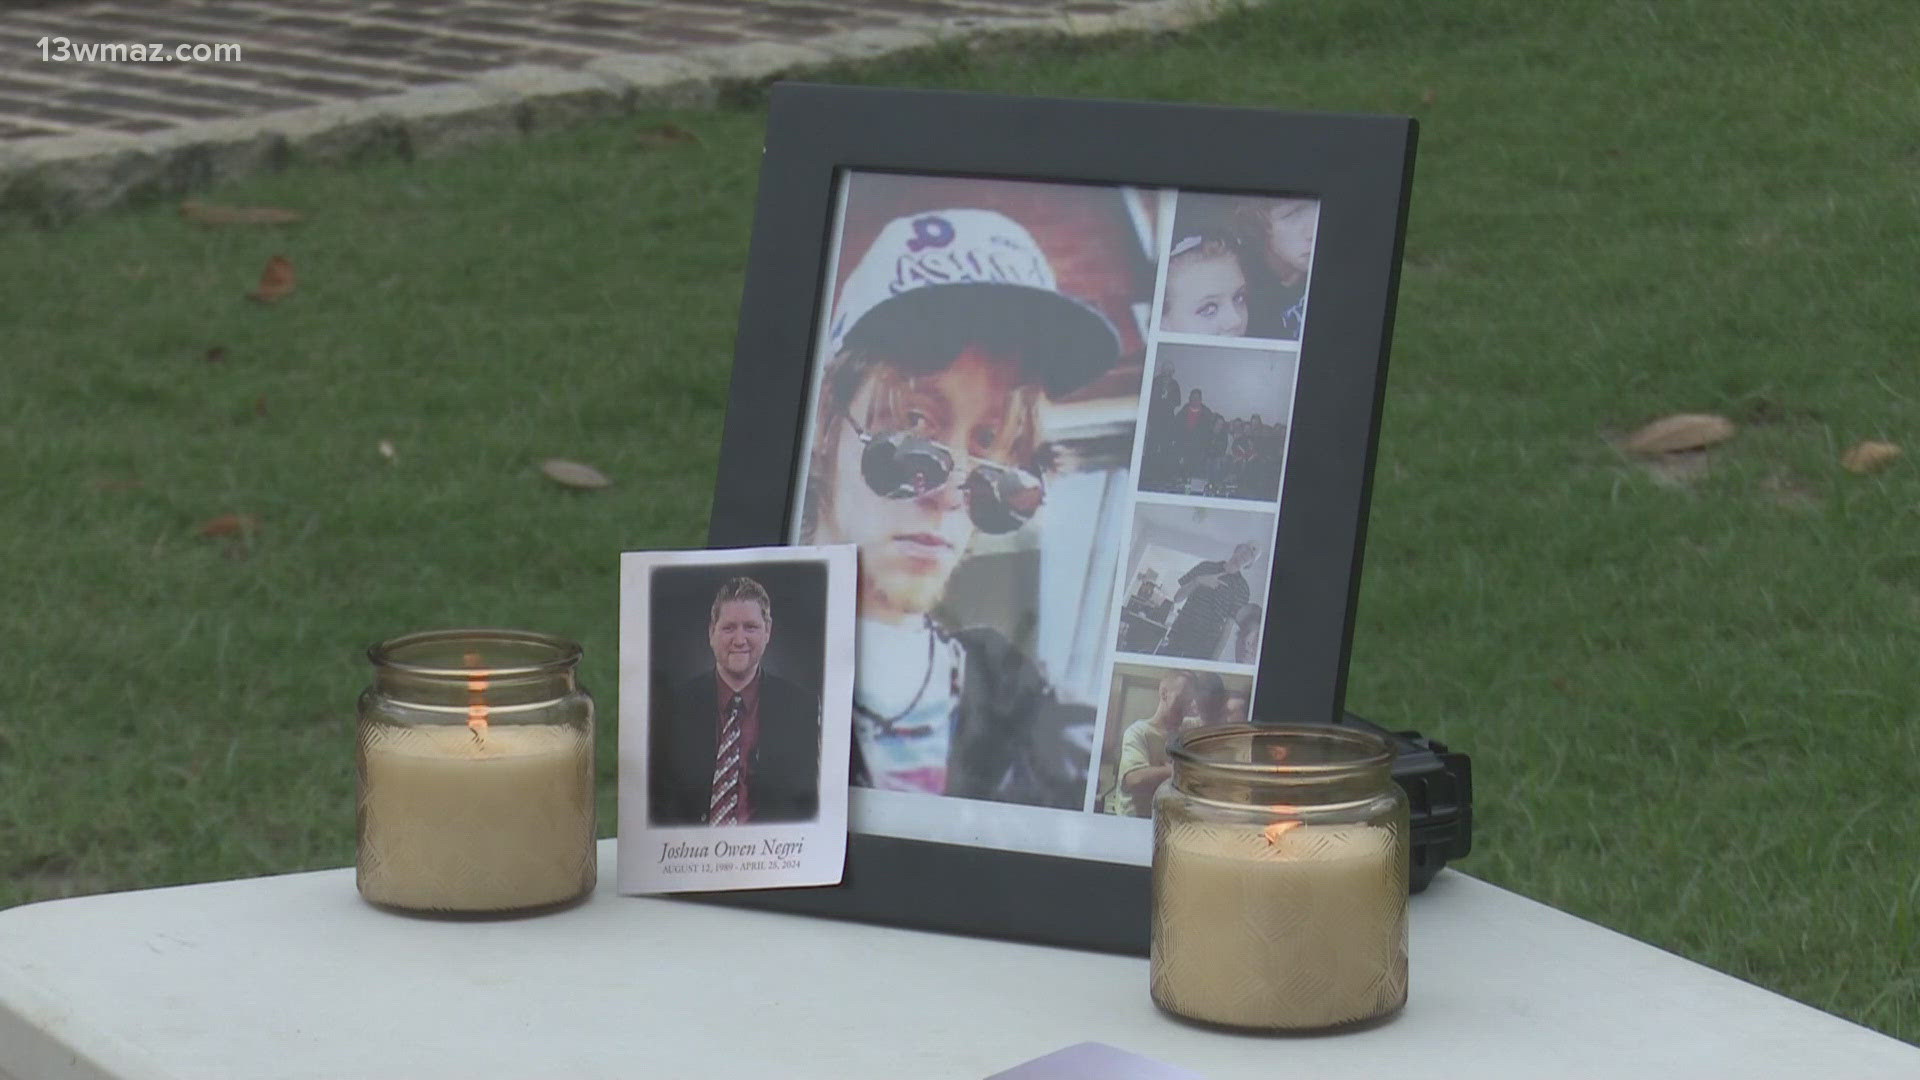 Friends held a vigil in honor of Joshua Owen Negri on Saturday. They ask people to be aware of the dangers of fentanyl.